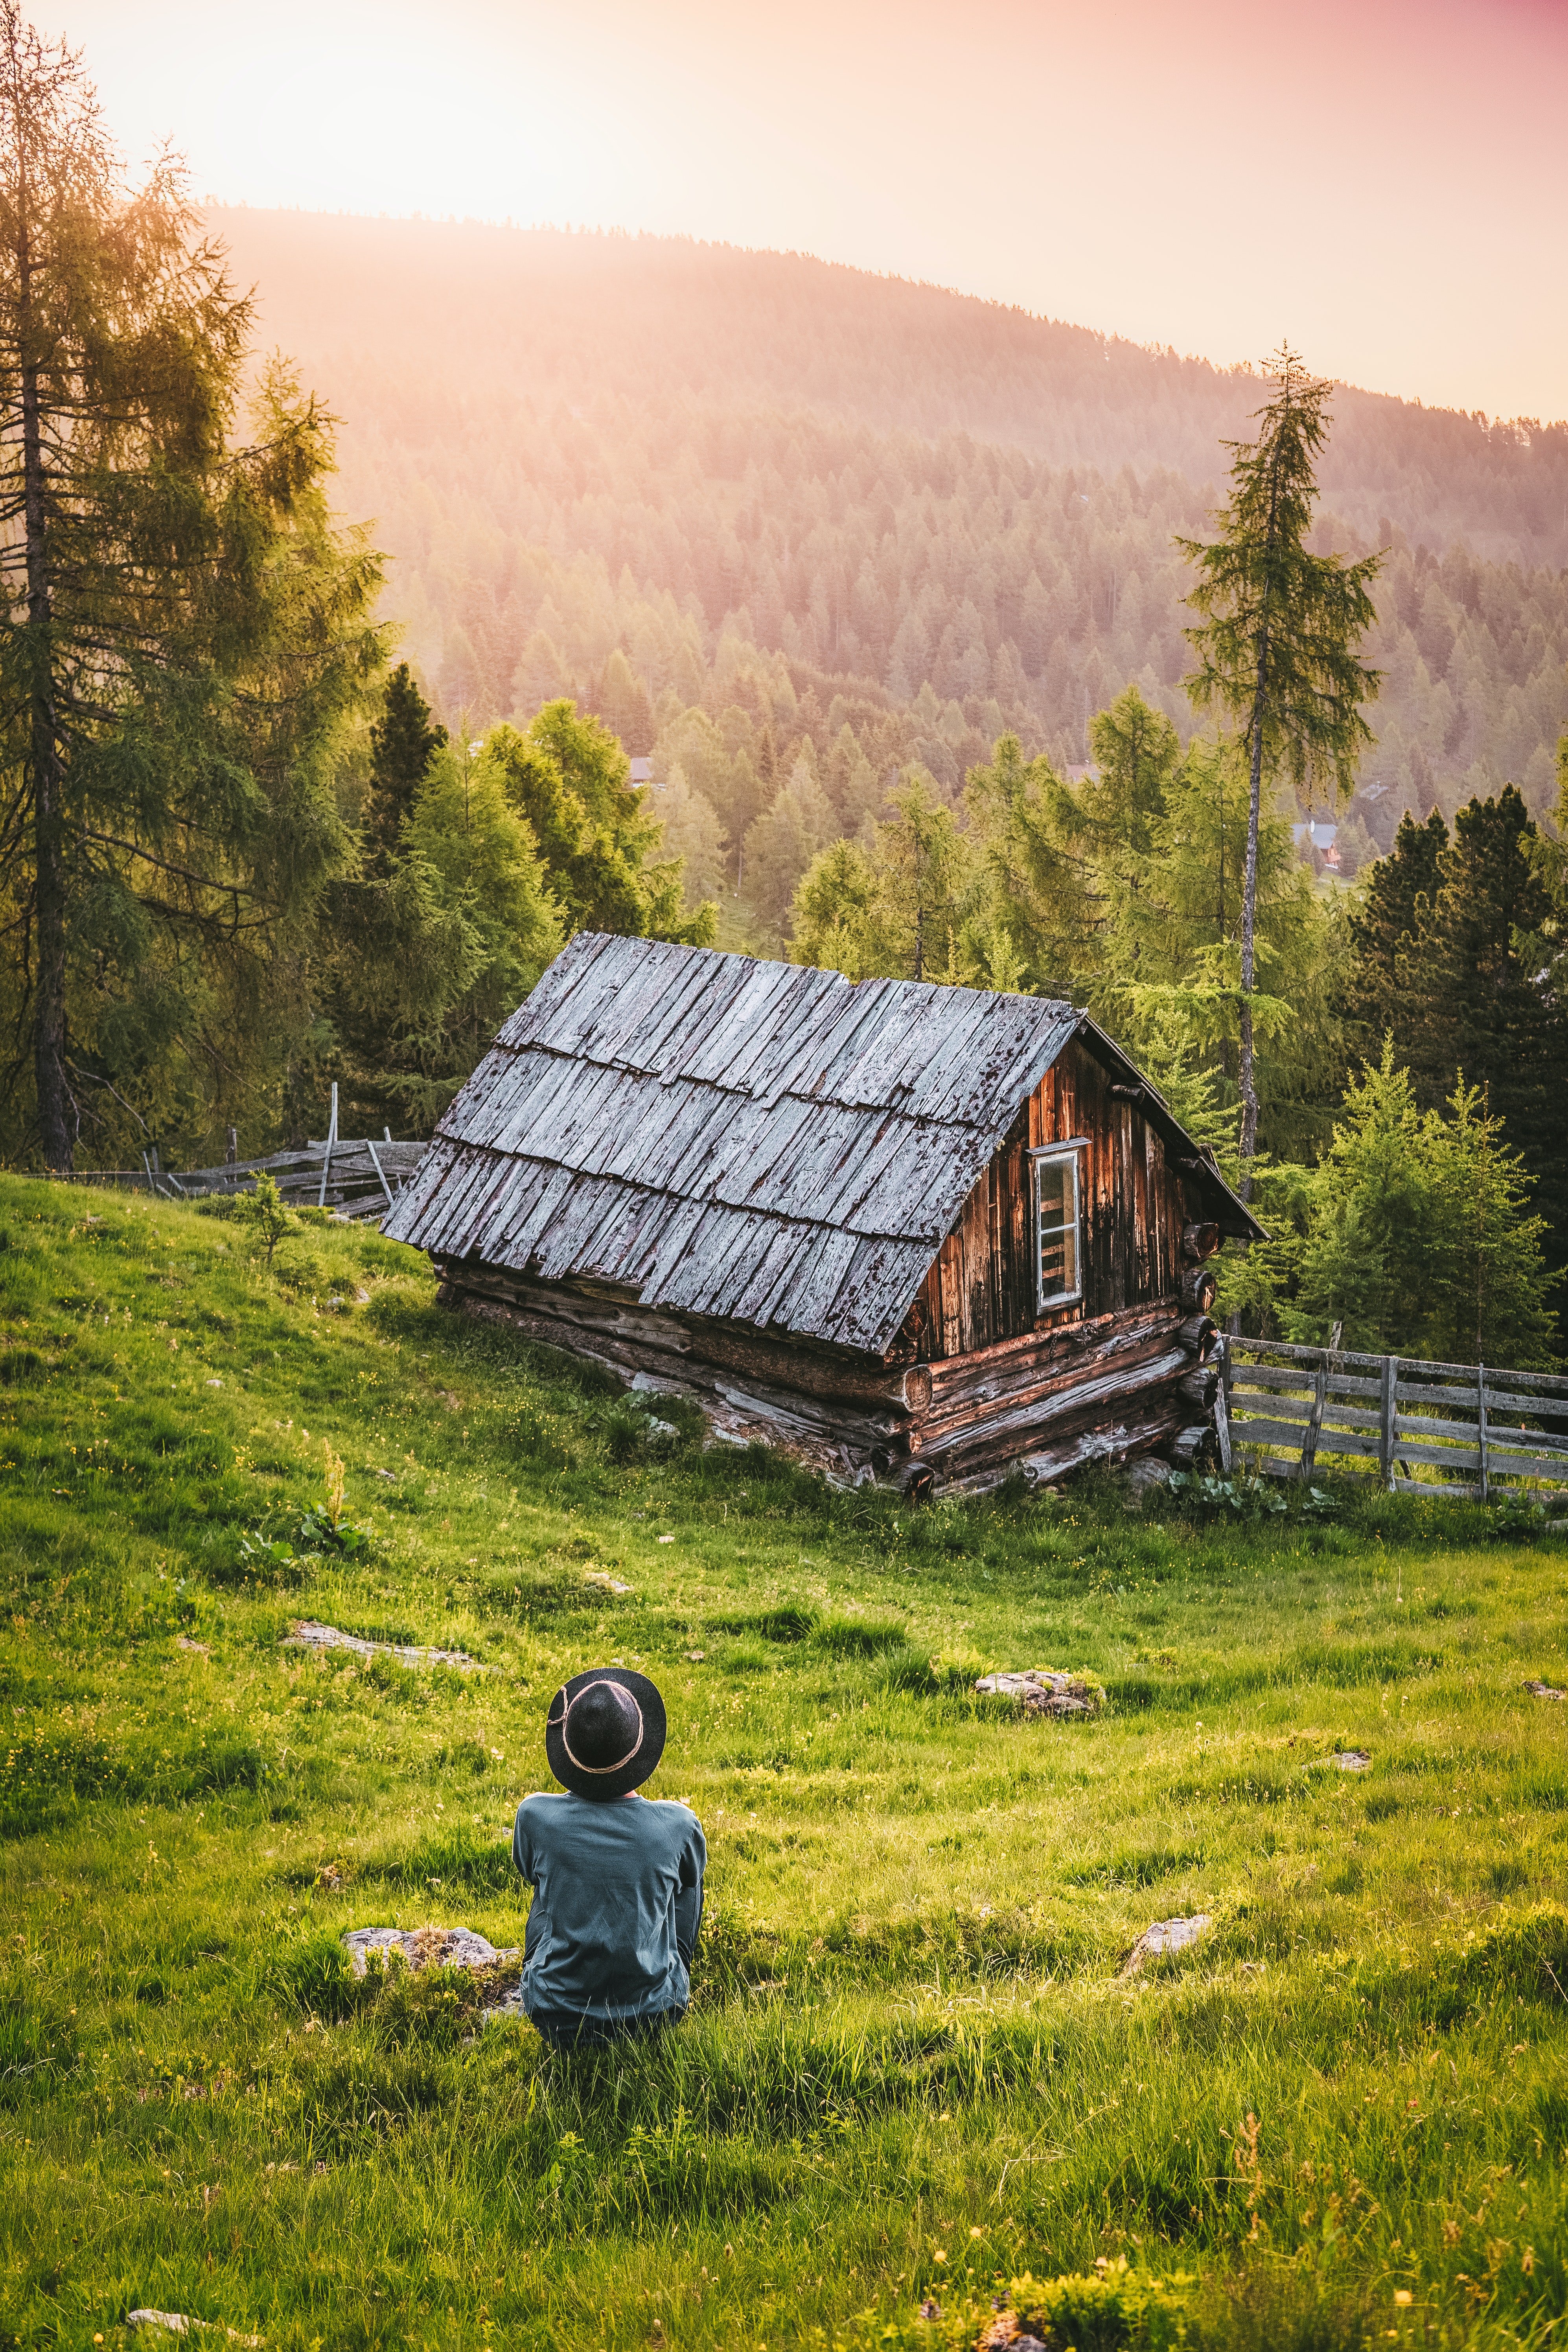 The writer moved to the countryside to dedicate more time to his writing. | Photo: Pexels